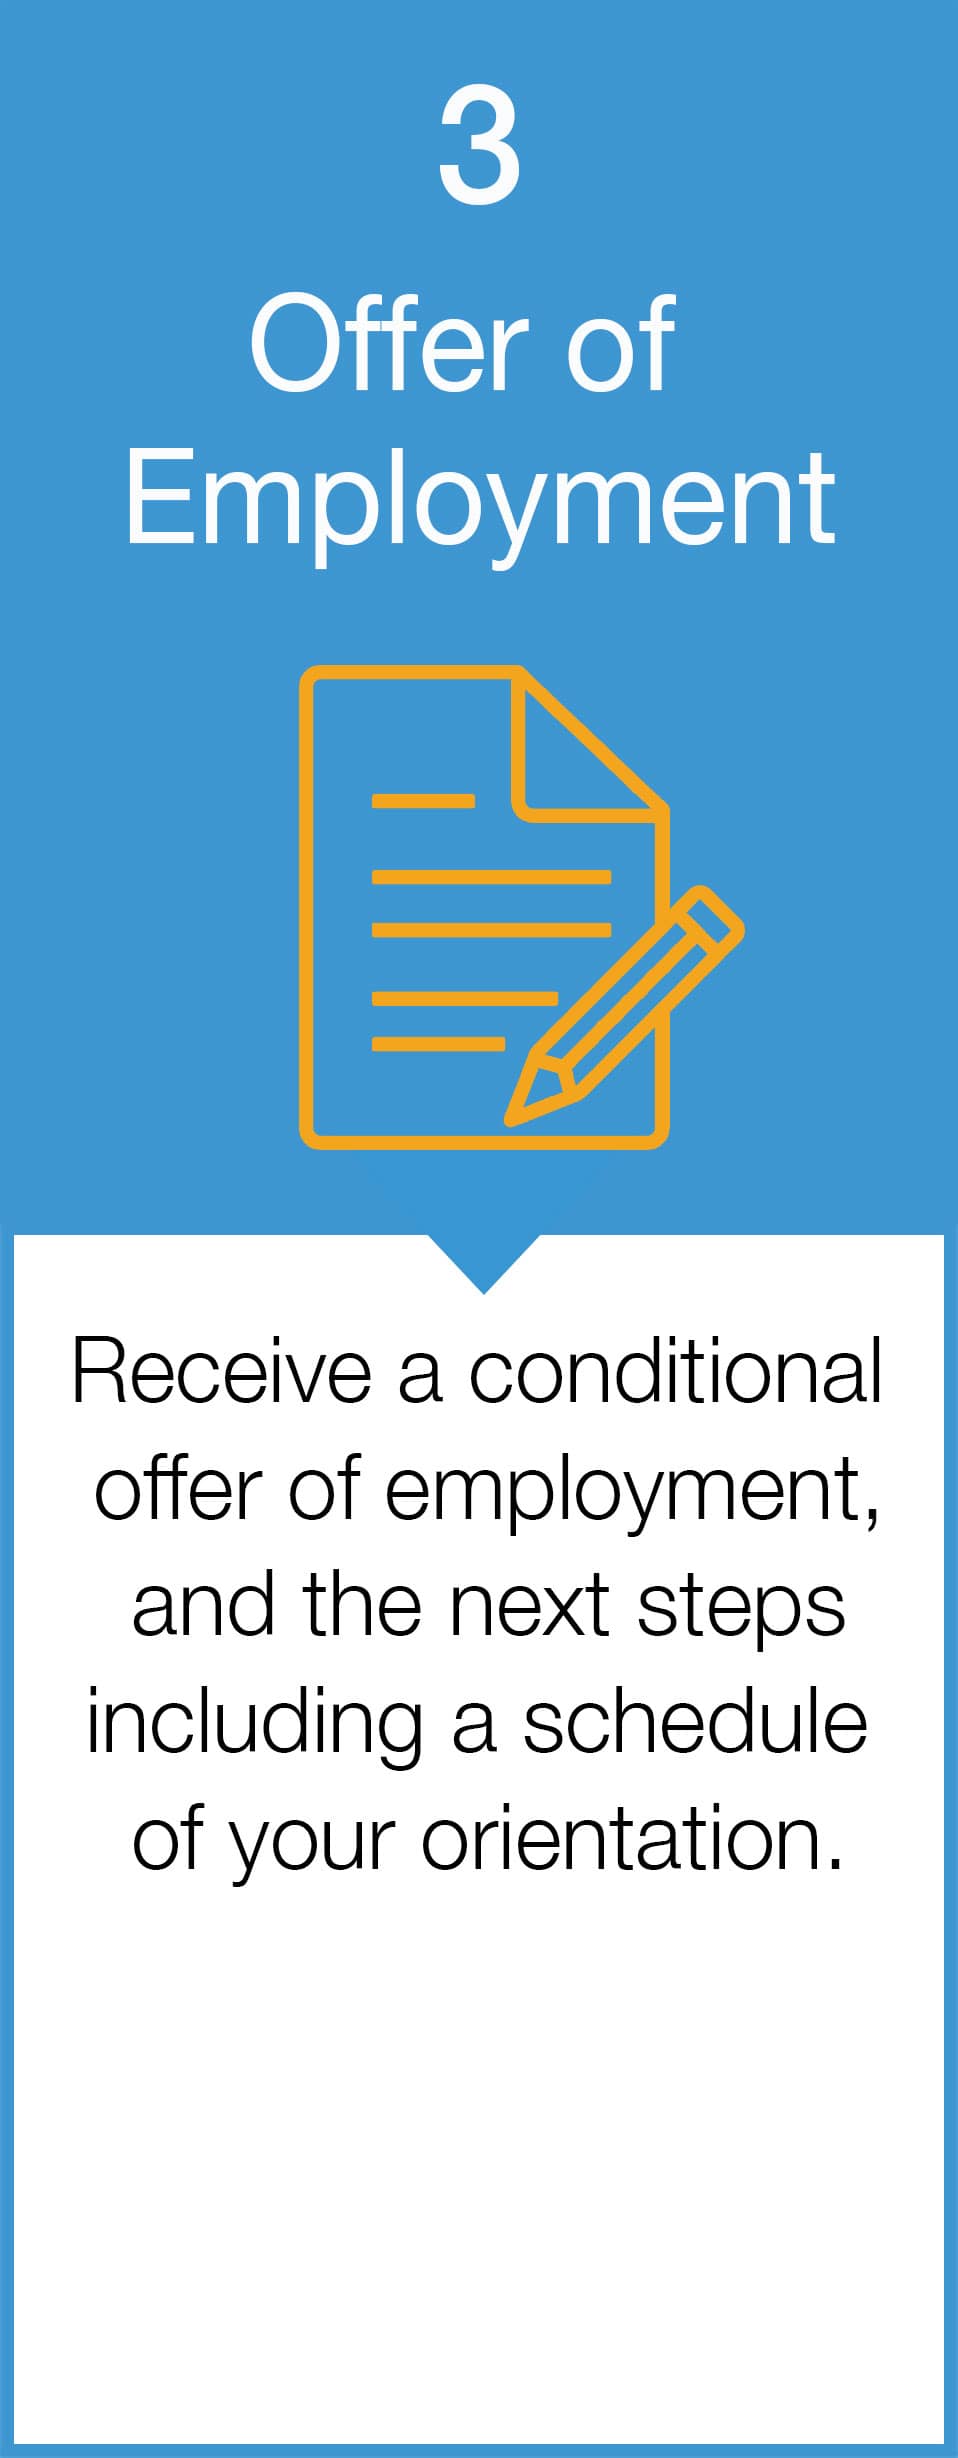 Step 3 Offer of Employment: Receive a conditional offer of employment, and the next steps including a schedule of your orientation.